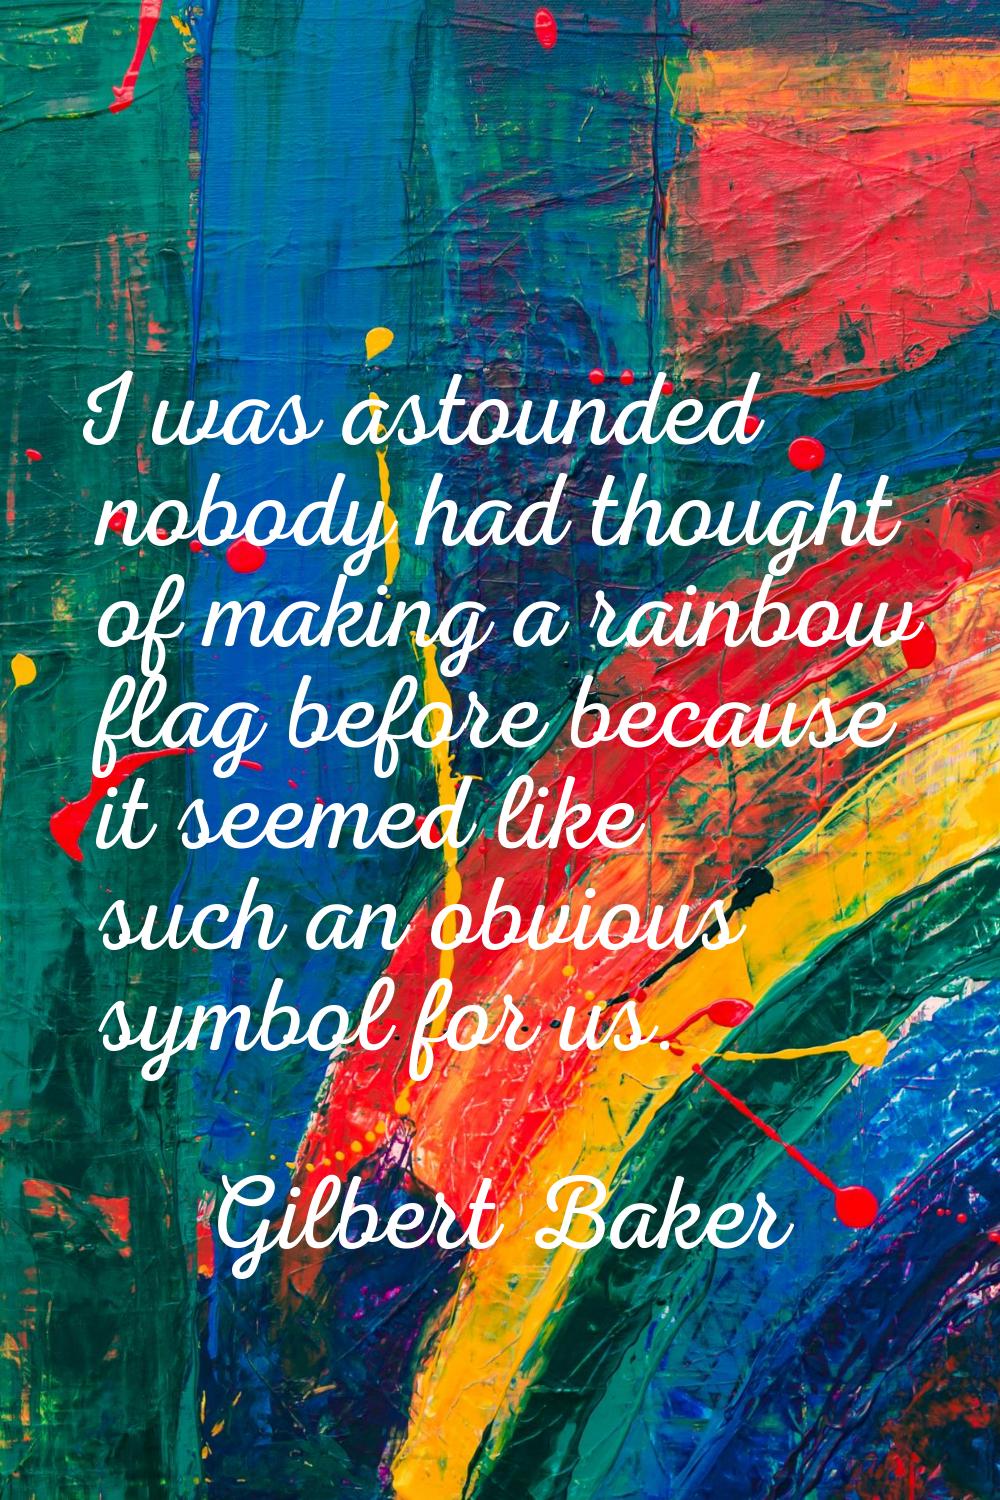 I was astounded nobody had thought of making a rainbow flag before because it seemed like such an o